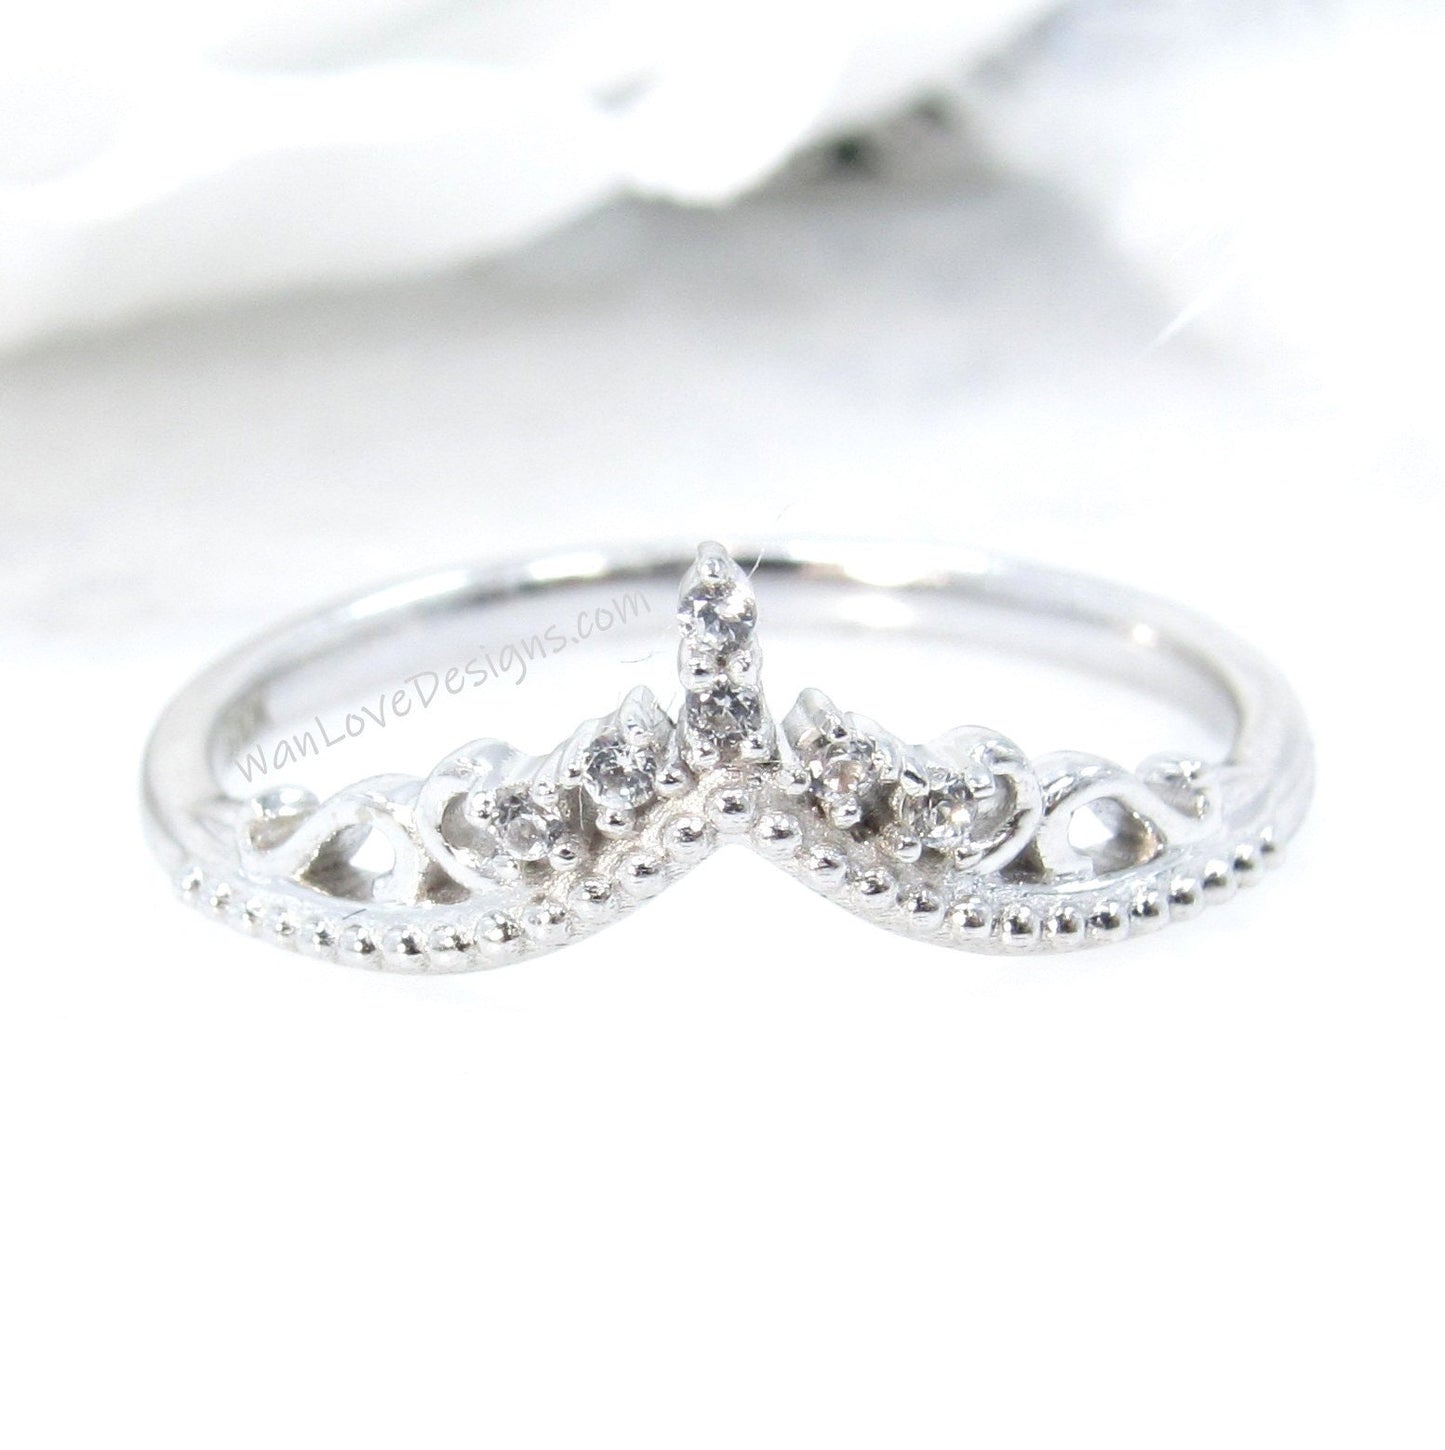 White Sapphire Royal Crown Wedding Band Curved wedding Ring Princess Tiara Ornate Round cut White Gold band Anniversary promise ring-Ready